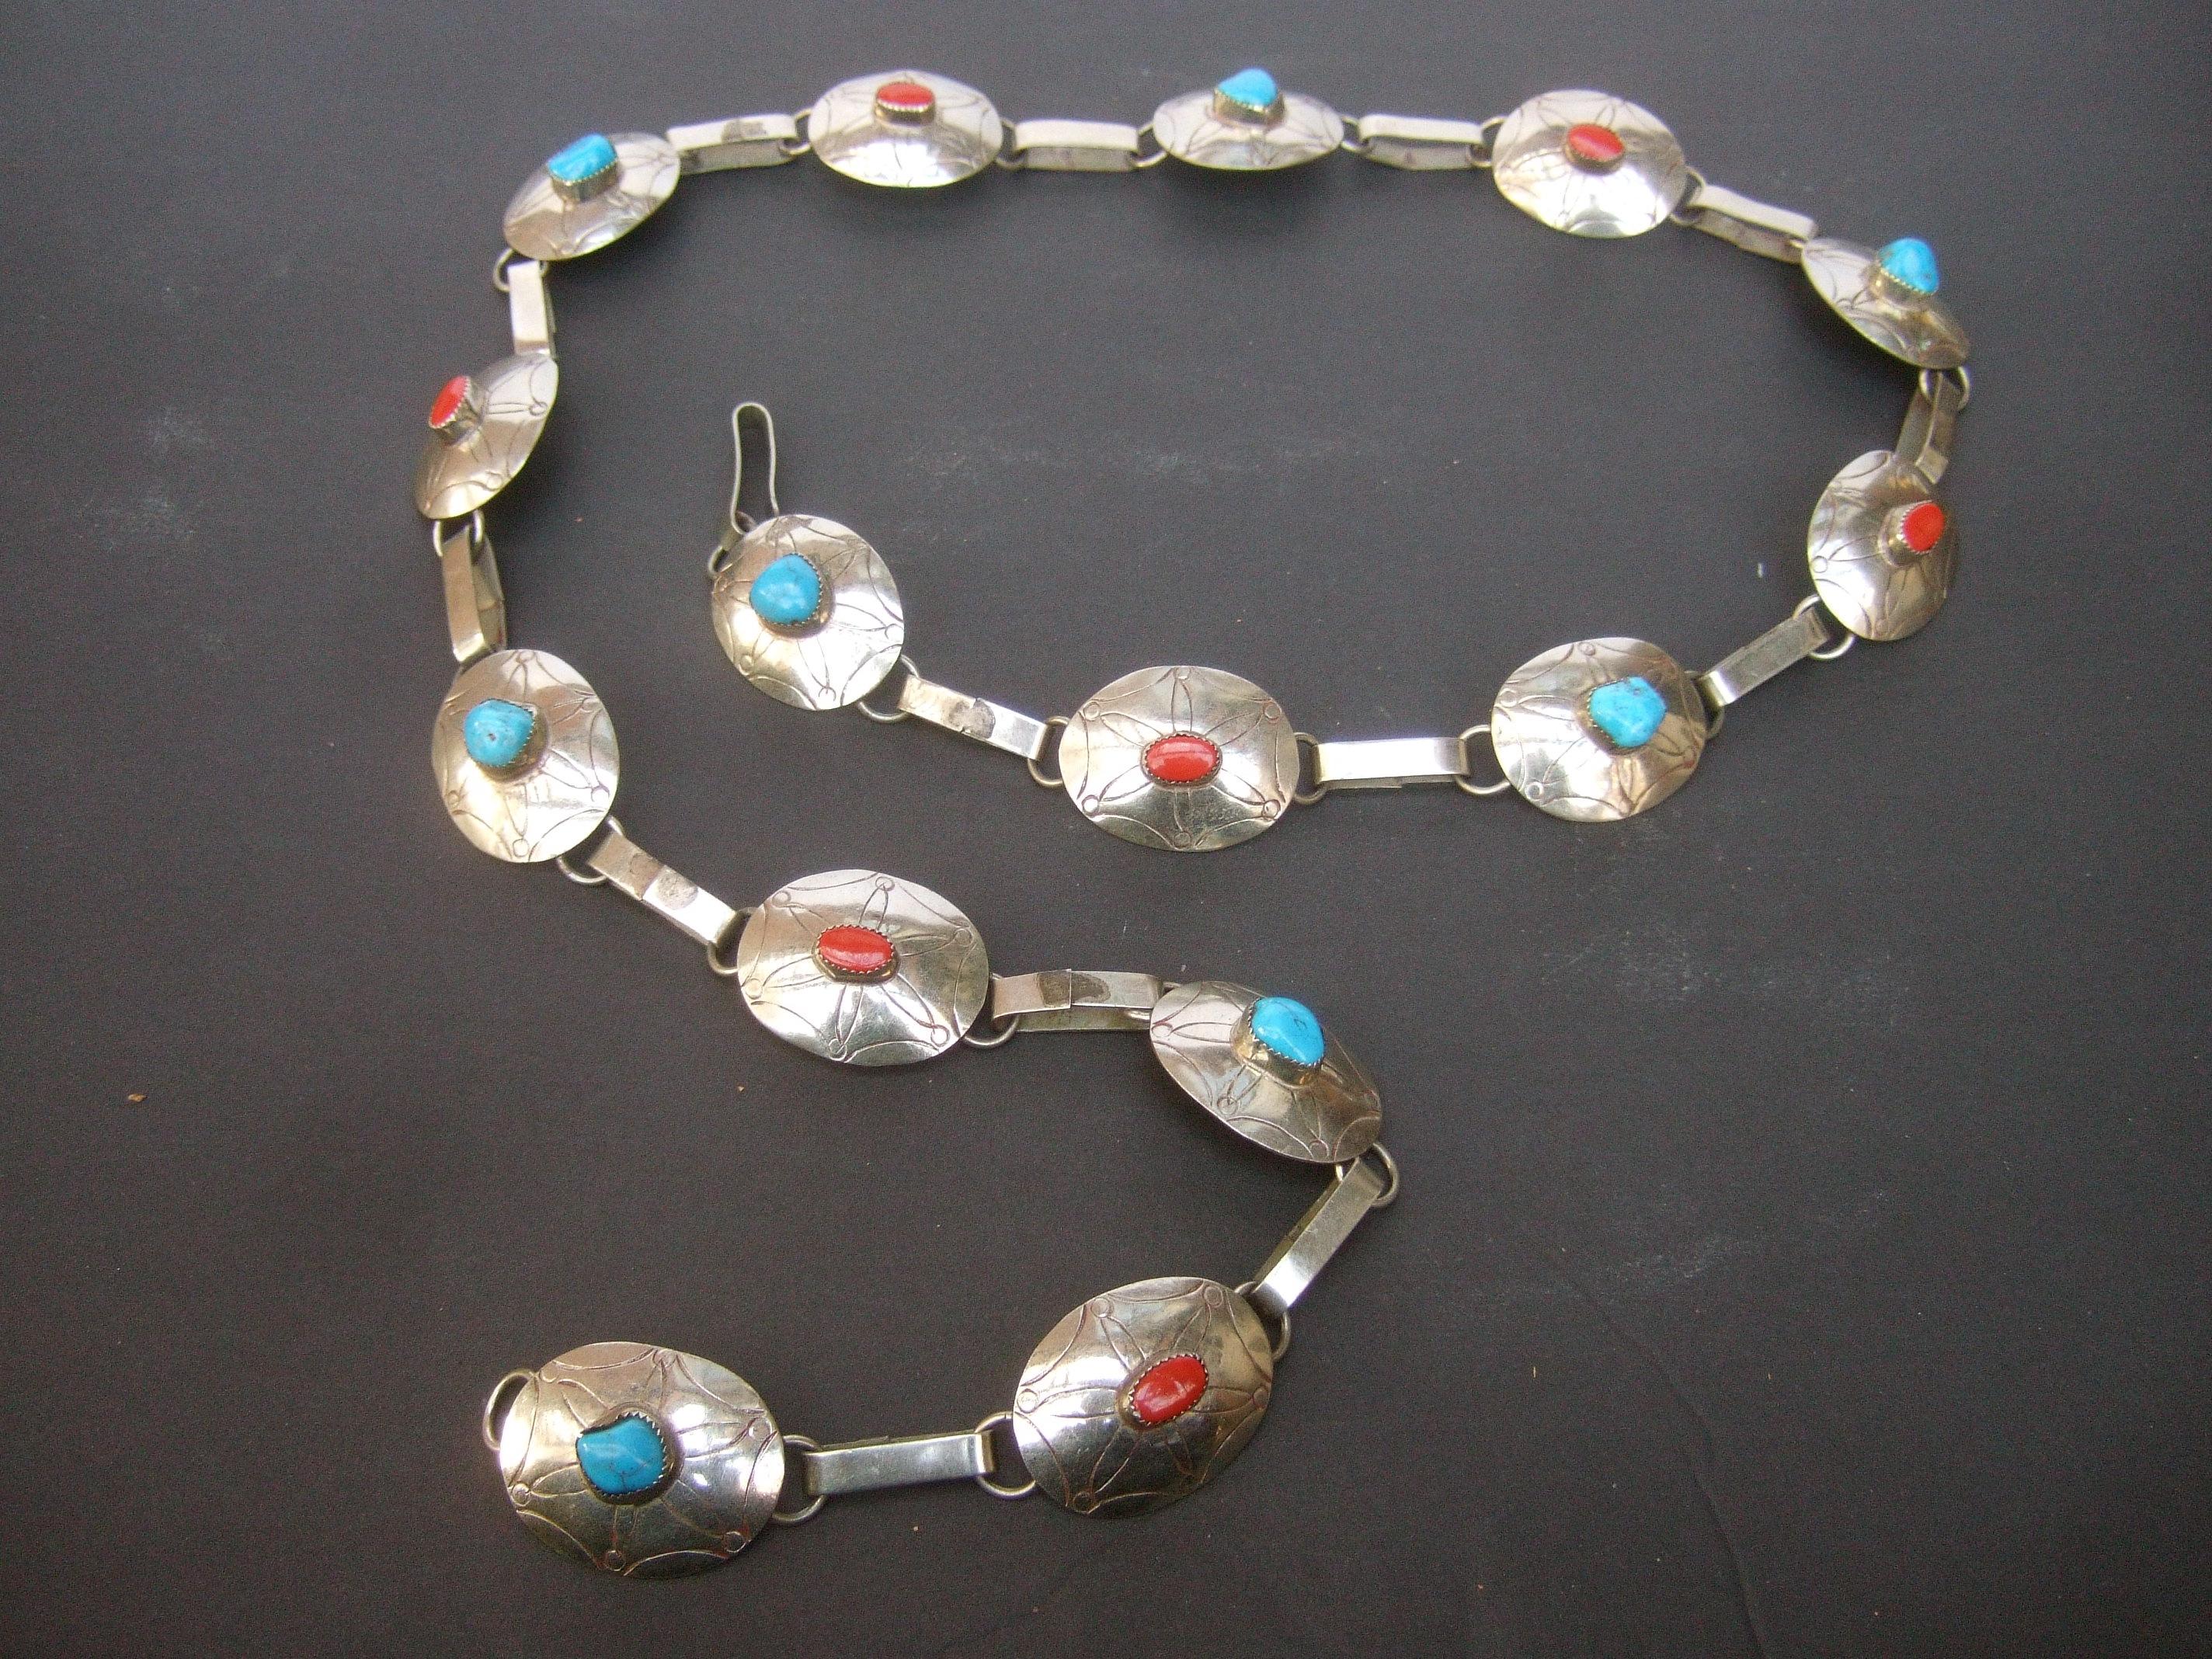 Sterling silver handmade artisan turquoise & coral stone link belt c 1970s
The unique artisan belt is comprised of 15 sterling silver oval-shaped links
with subtle impressed designs 

Each of the sterling silver buckles is adorned with alternating